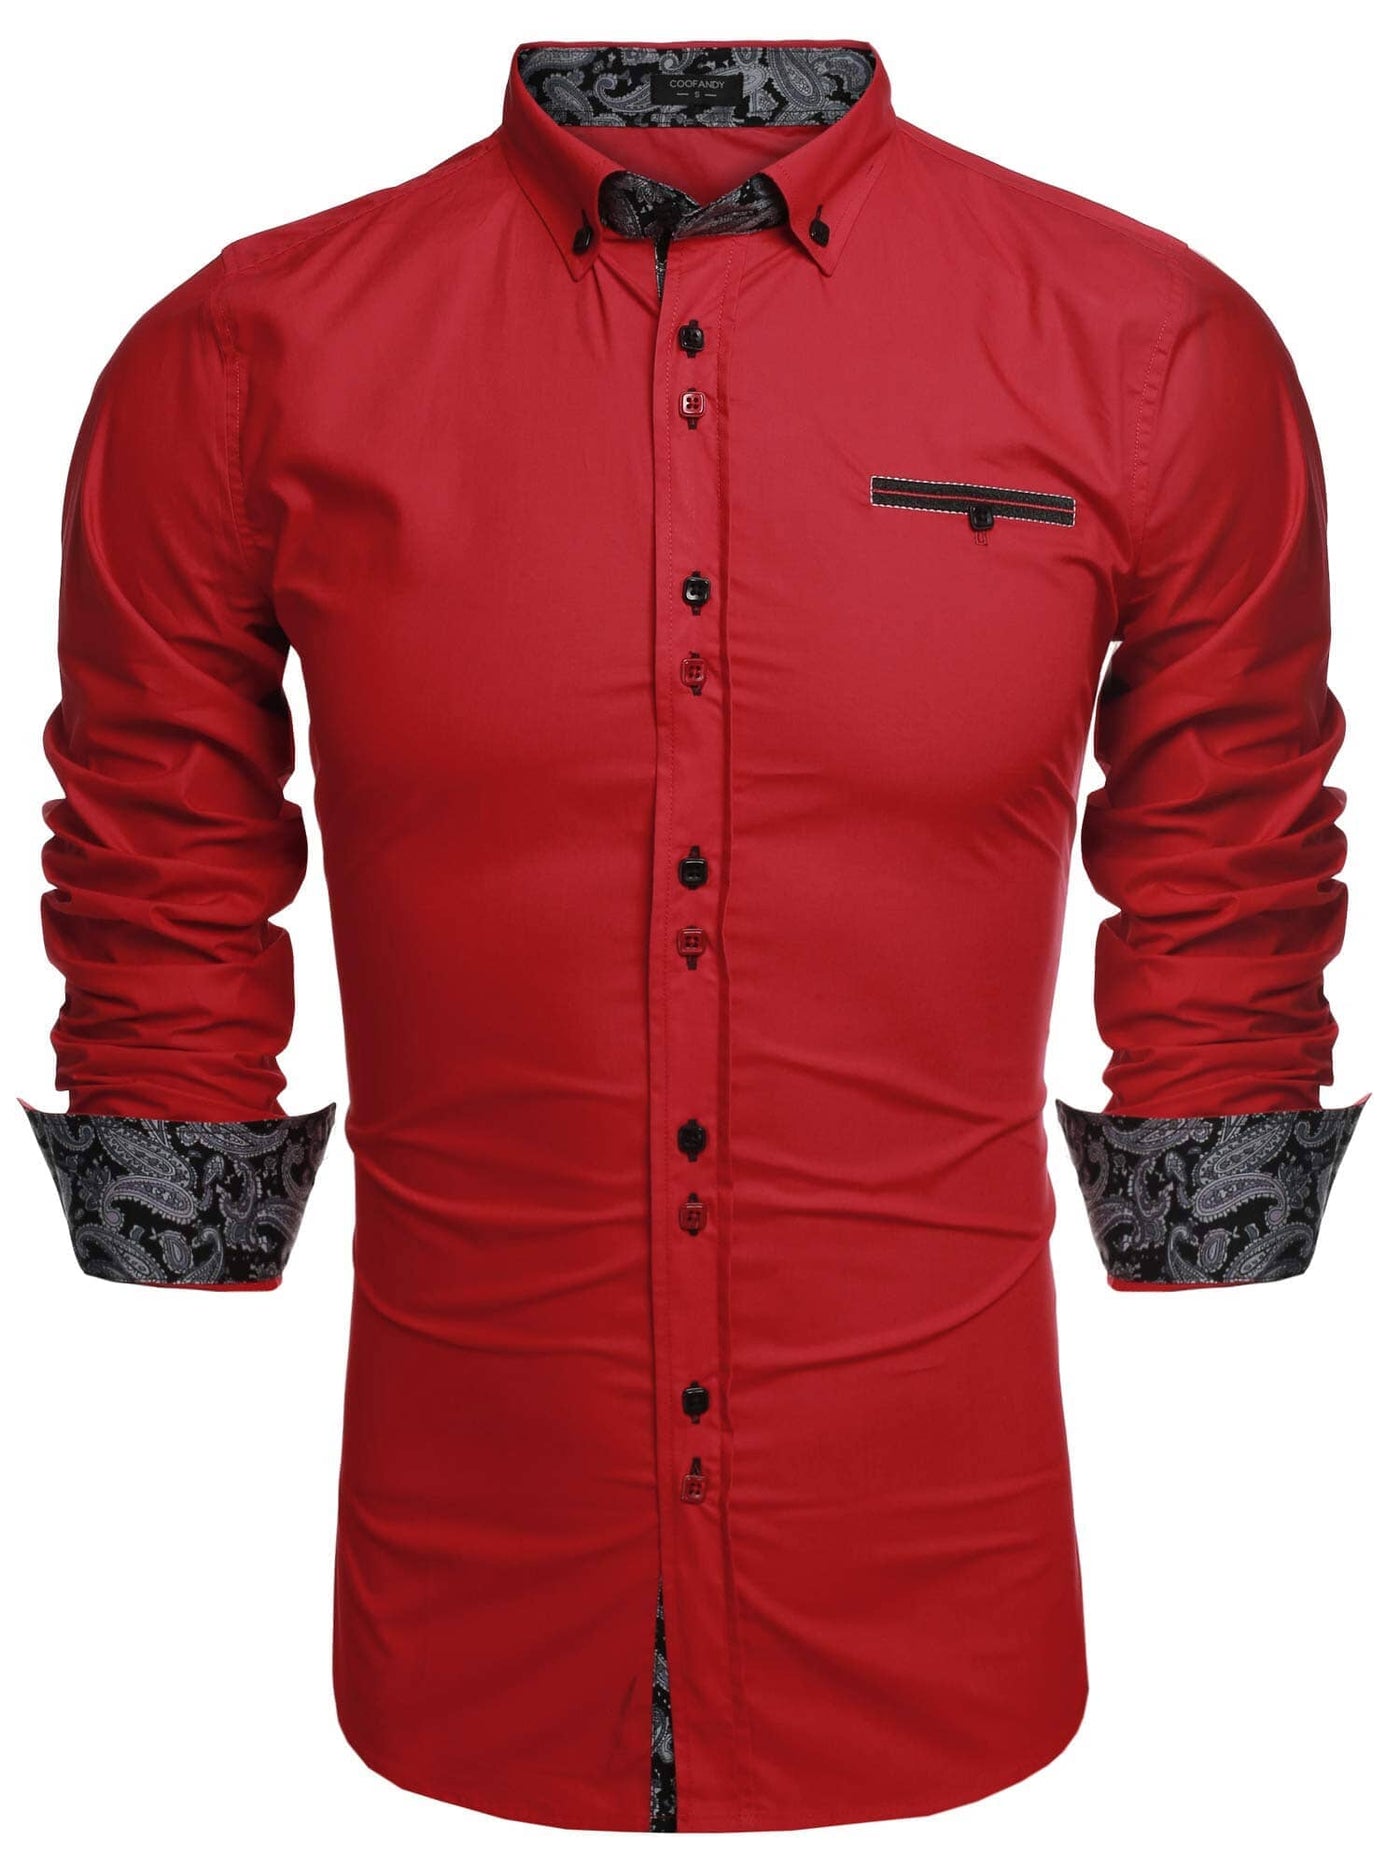 Coofandy Dress Button Down Shirts (US Only) Shirts coofandy Red S 